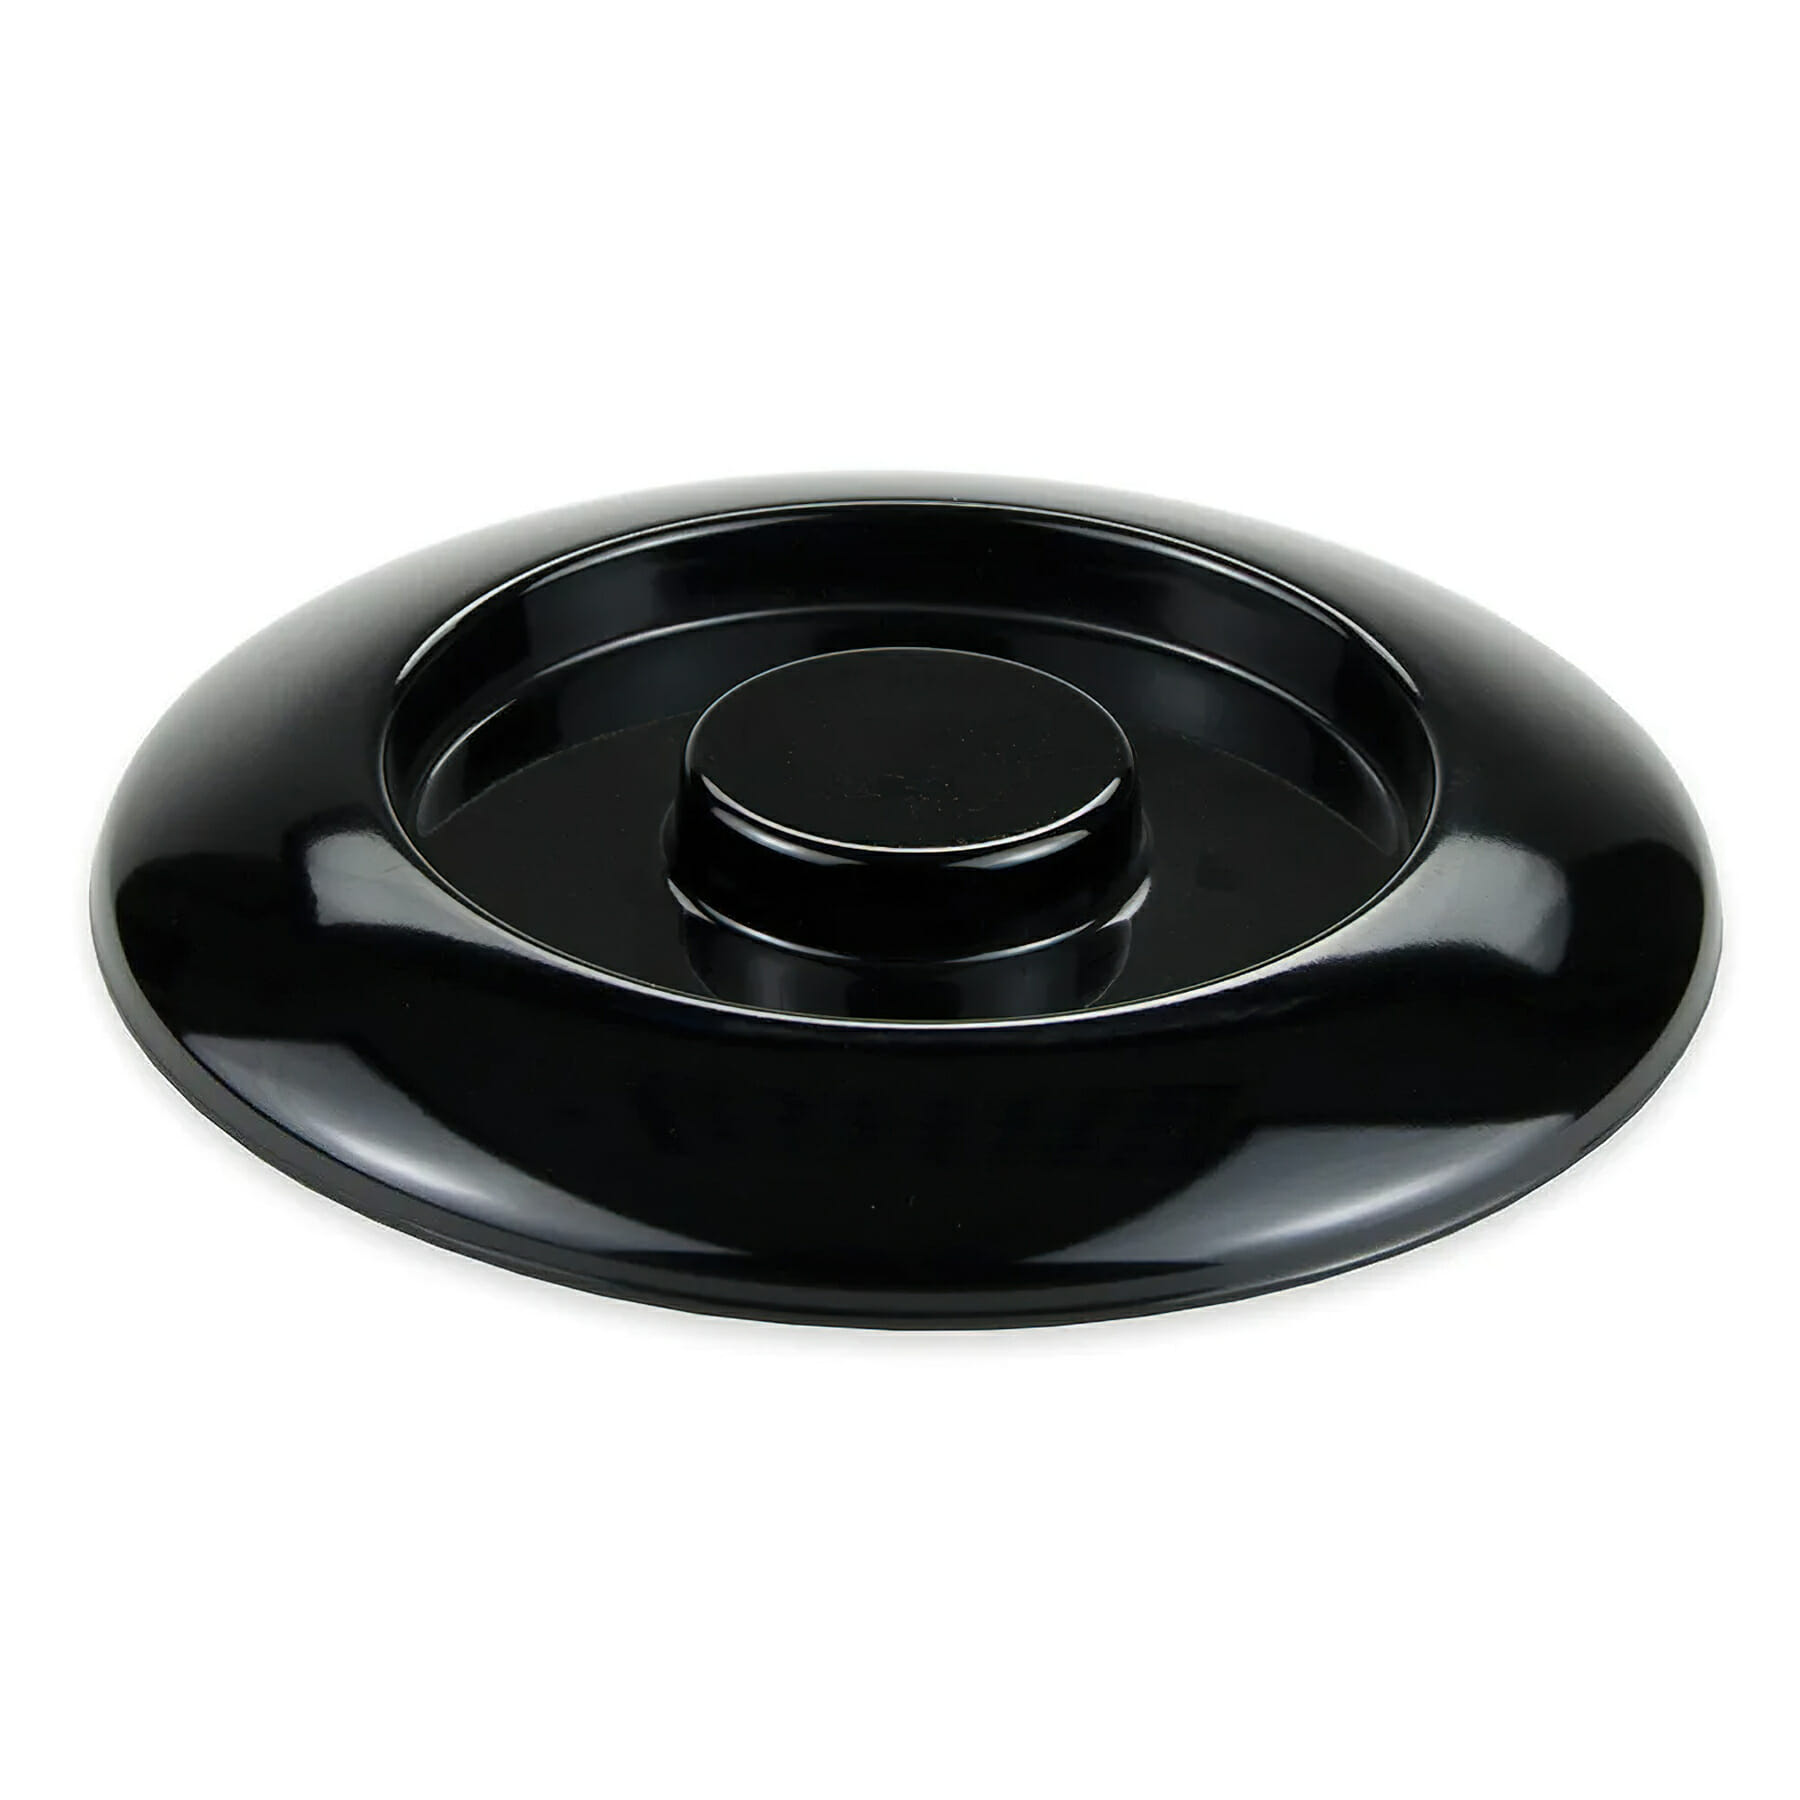 7.75" Replacement Lid for TS-800